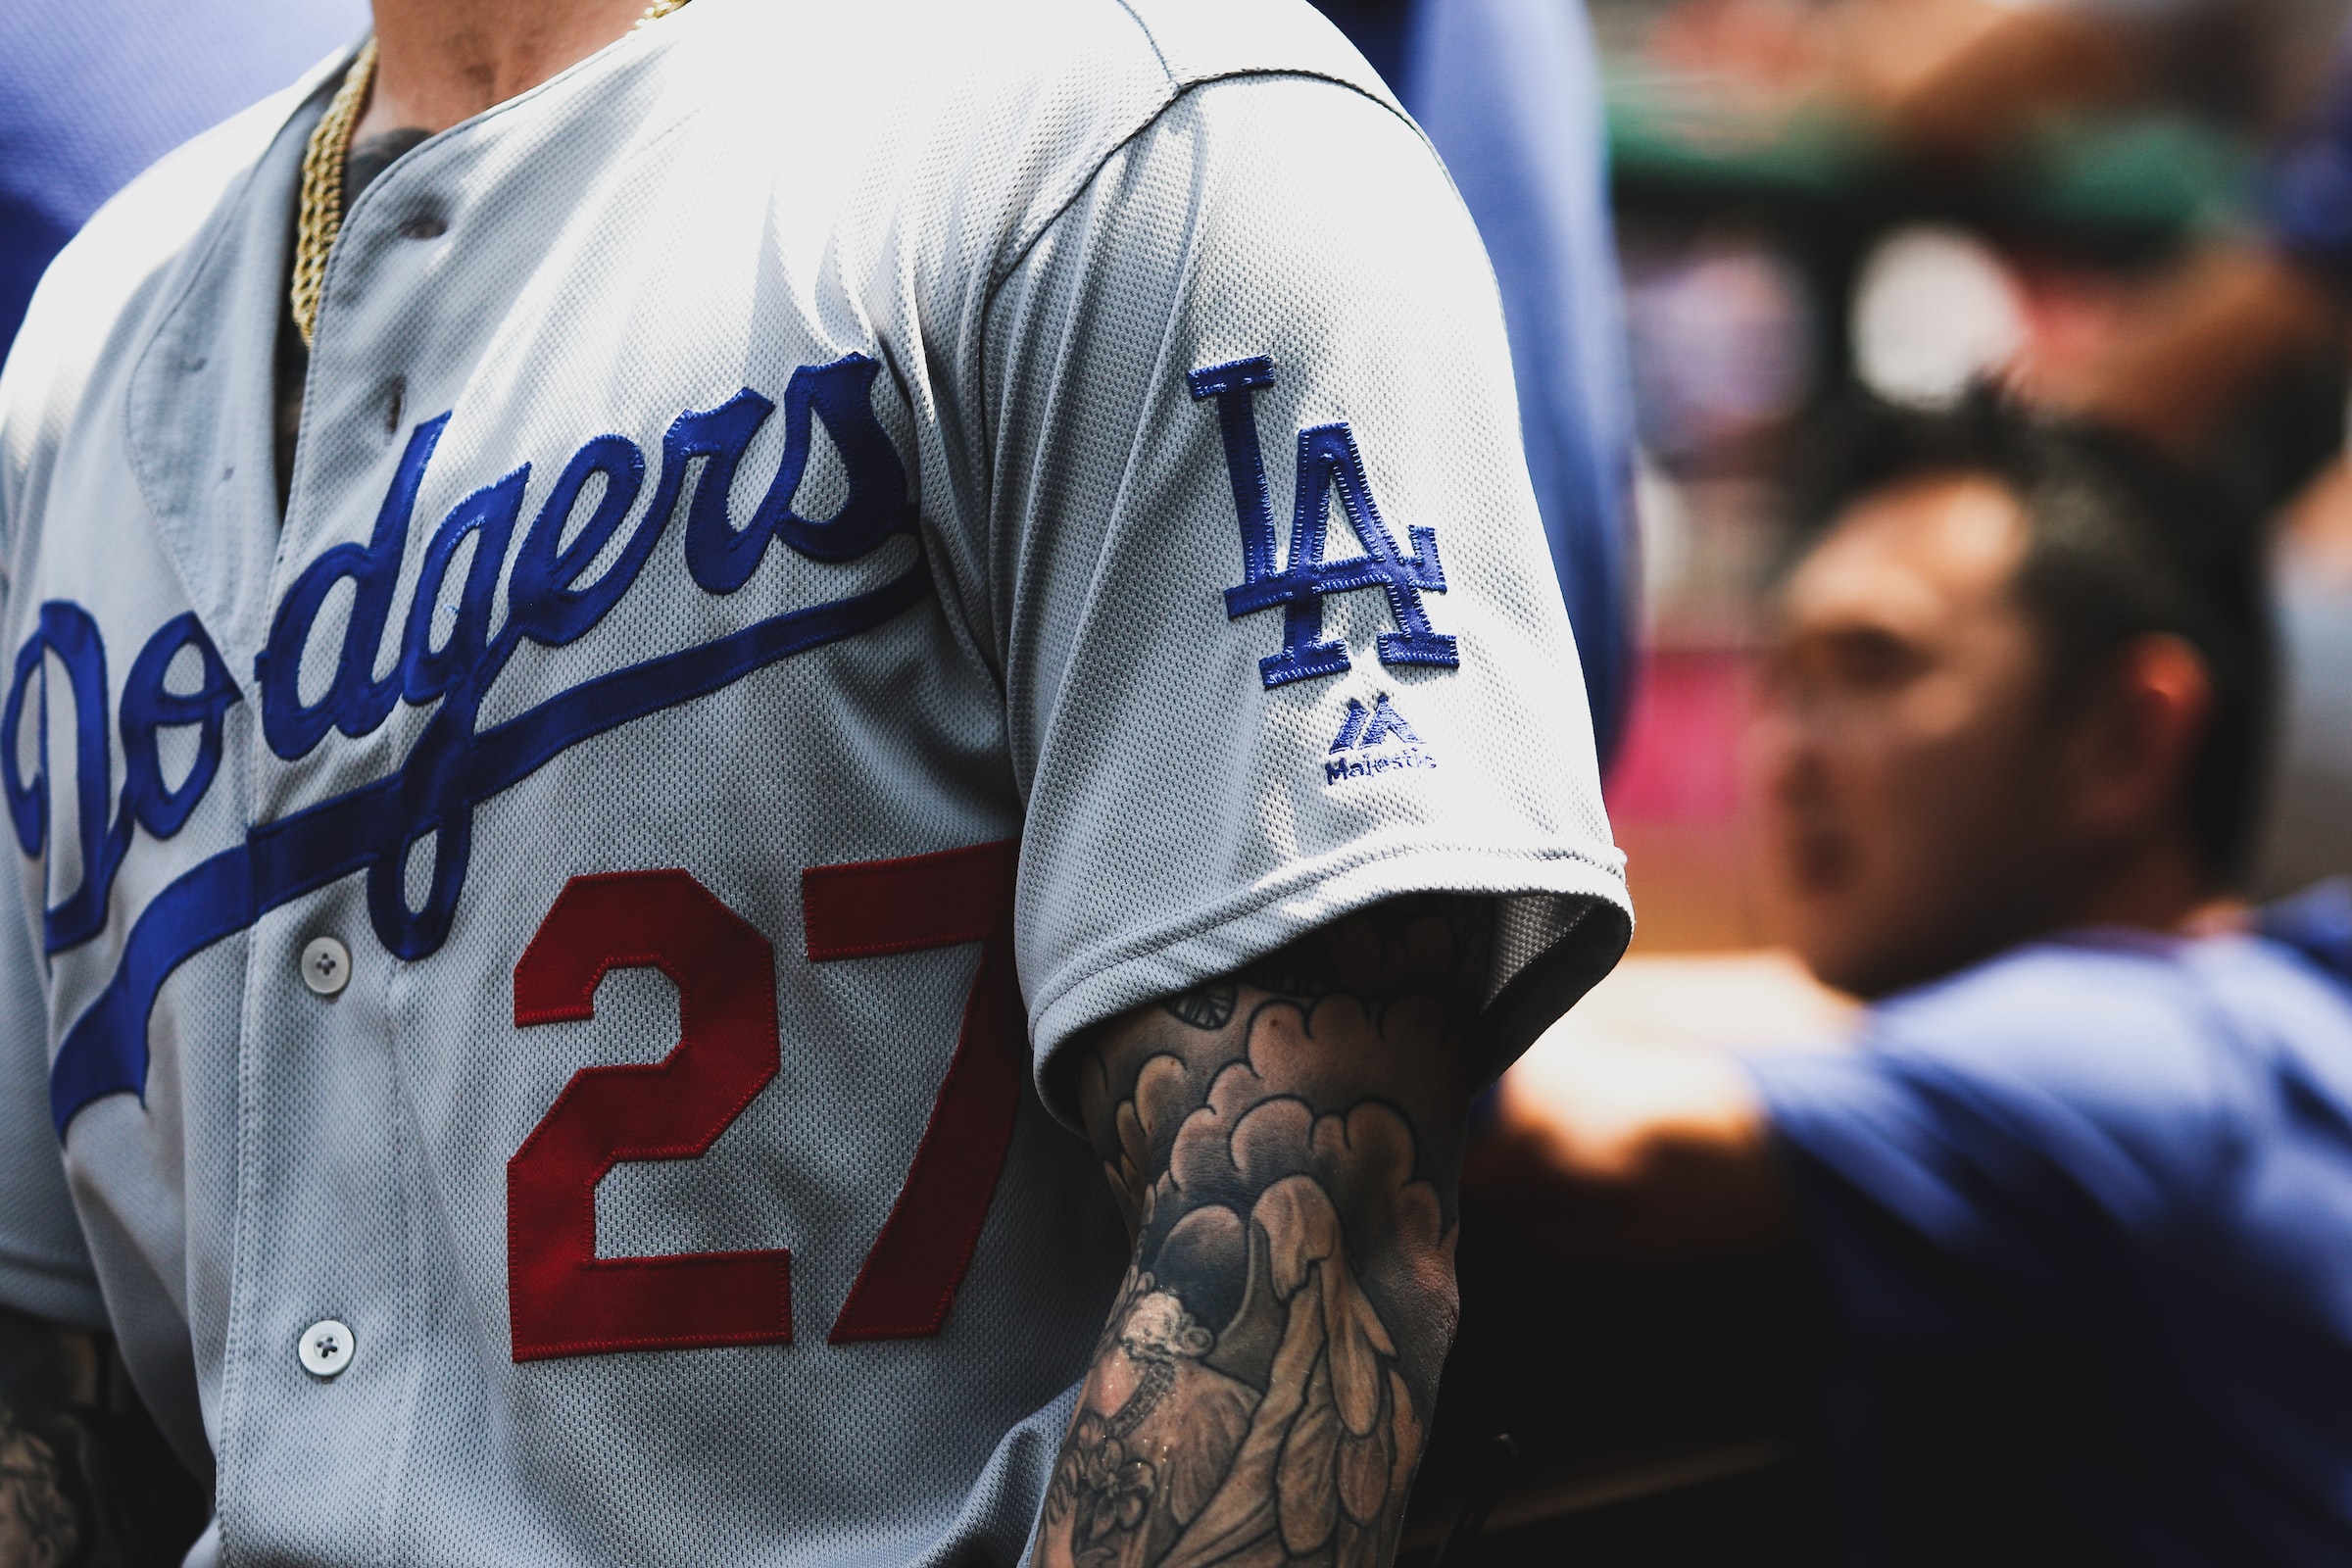 Los angeles dodgers player with his uniform